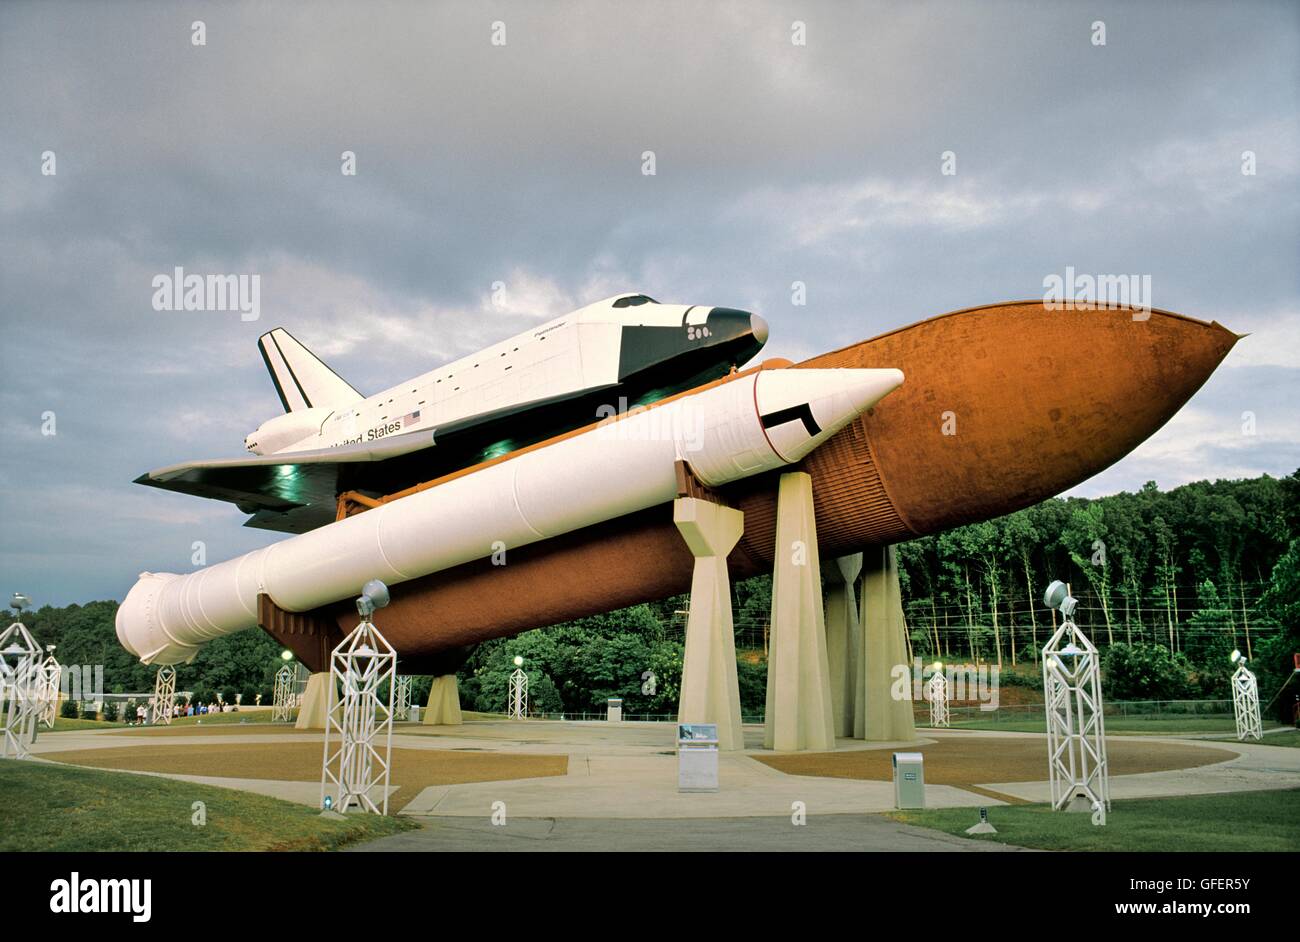 The space shuttle Pathfinder attached to fuel launch pods on display at the US Space and Rocket Center, Huntsville, Alabama, USA Stock Photo